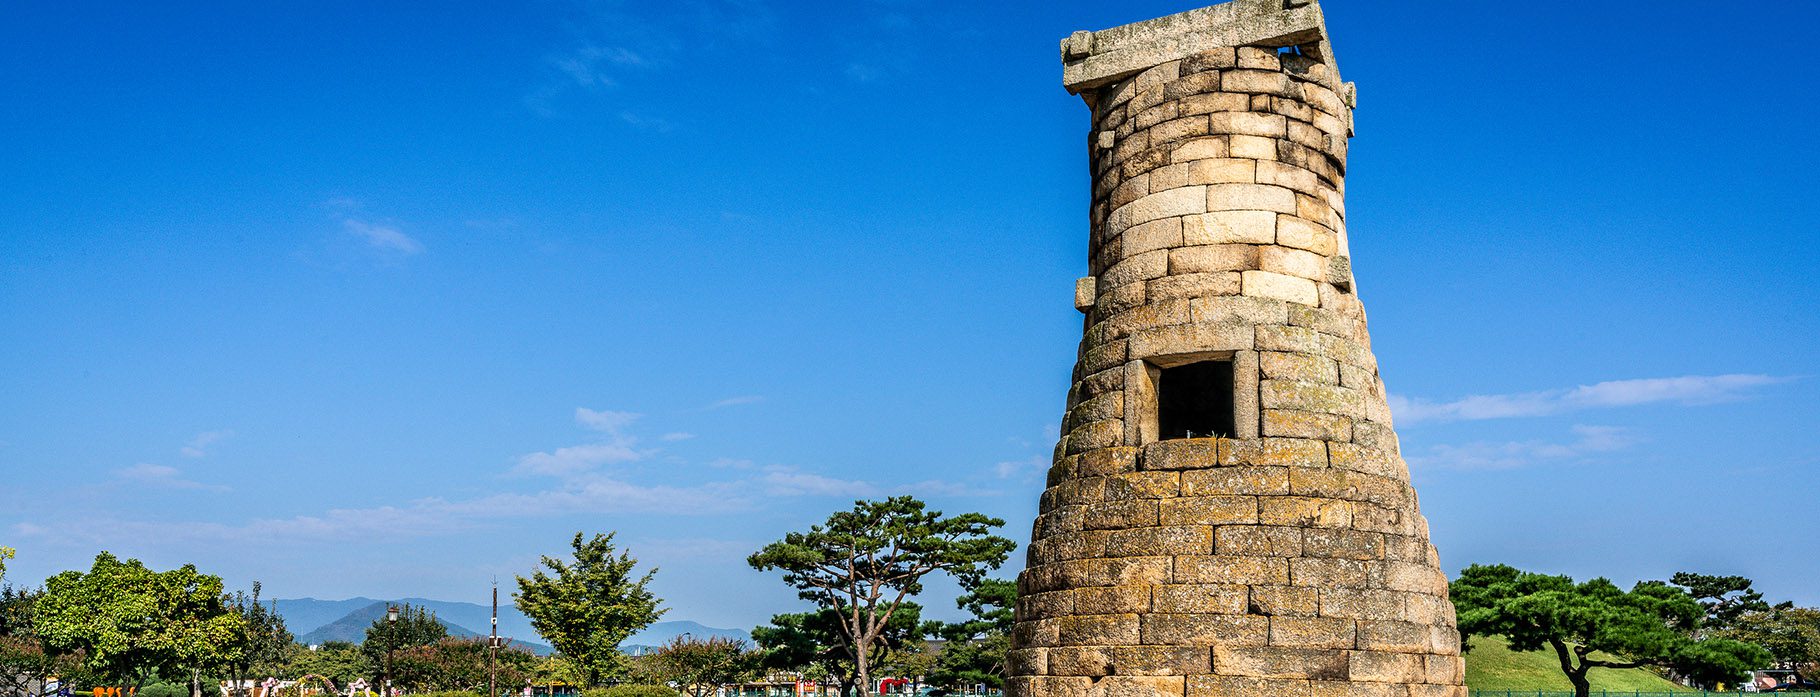 8 DAYS ON THE TRAIL OF SOUTH KOREA’S ANCIENT KINGDOMS